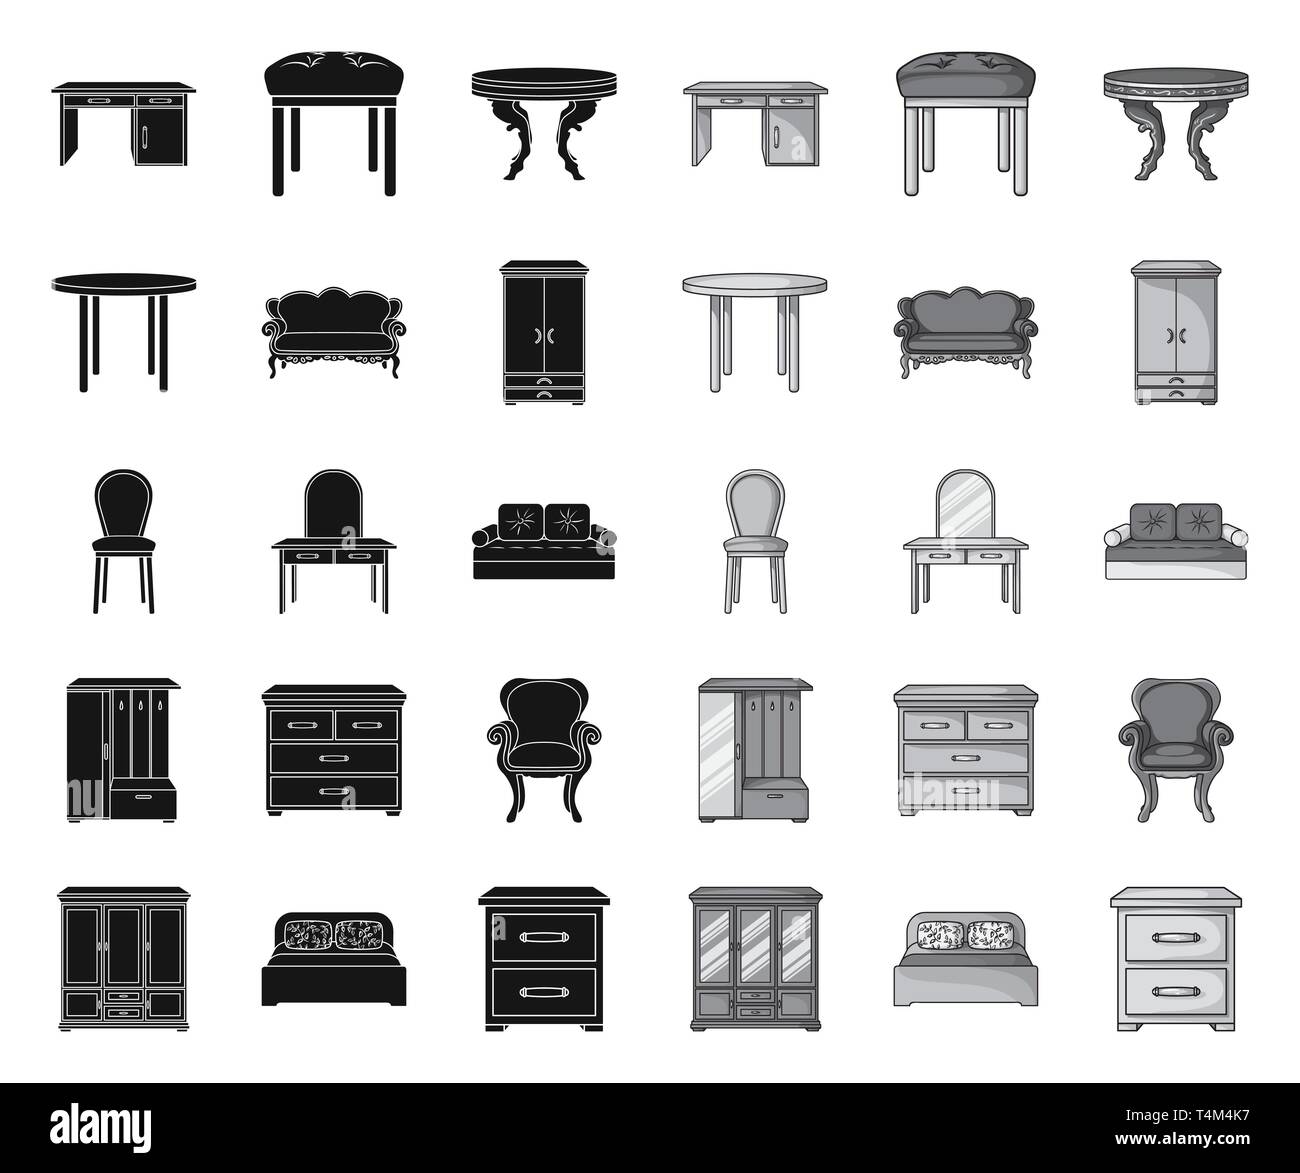 accessory,apartment,armchair,art,back,baroque,bed,bedside,black.mono,cabinet,chair,classical,closet,collection,couch,cupboard,design,desk,double,drawers,dressing,furnishing,furniture,home,house,icon,illustration,interior,isolated,logo,modern,office,retro,round,set,sign,sofa,stool,symbol,table,various,vector,vestibule,vintage,wardrobe,web,wing,wooden Vector Vectors , Stock Vector